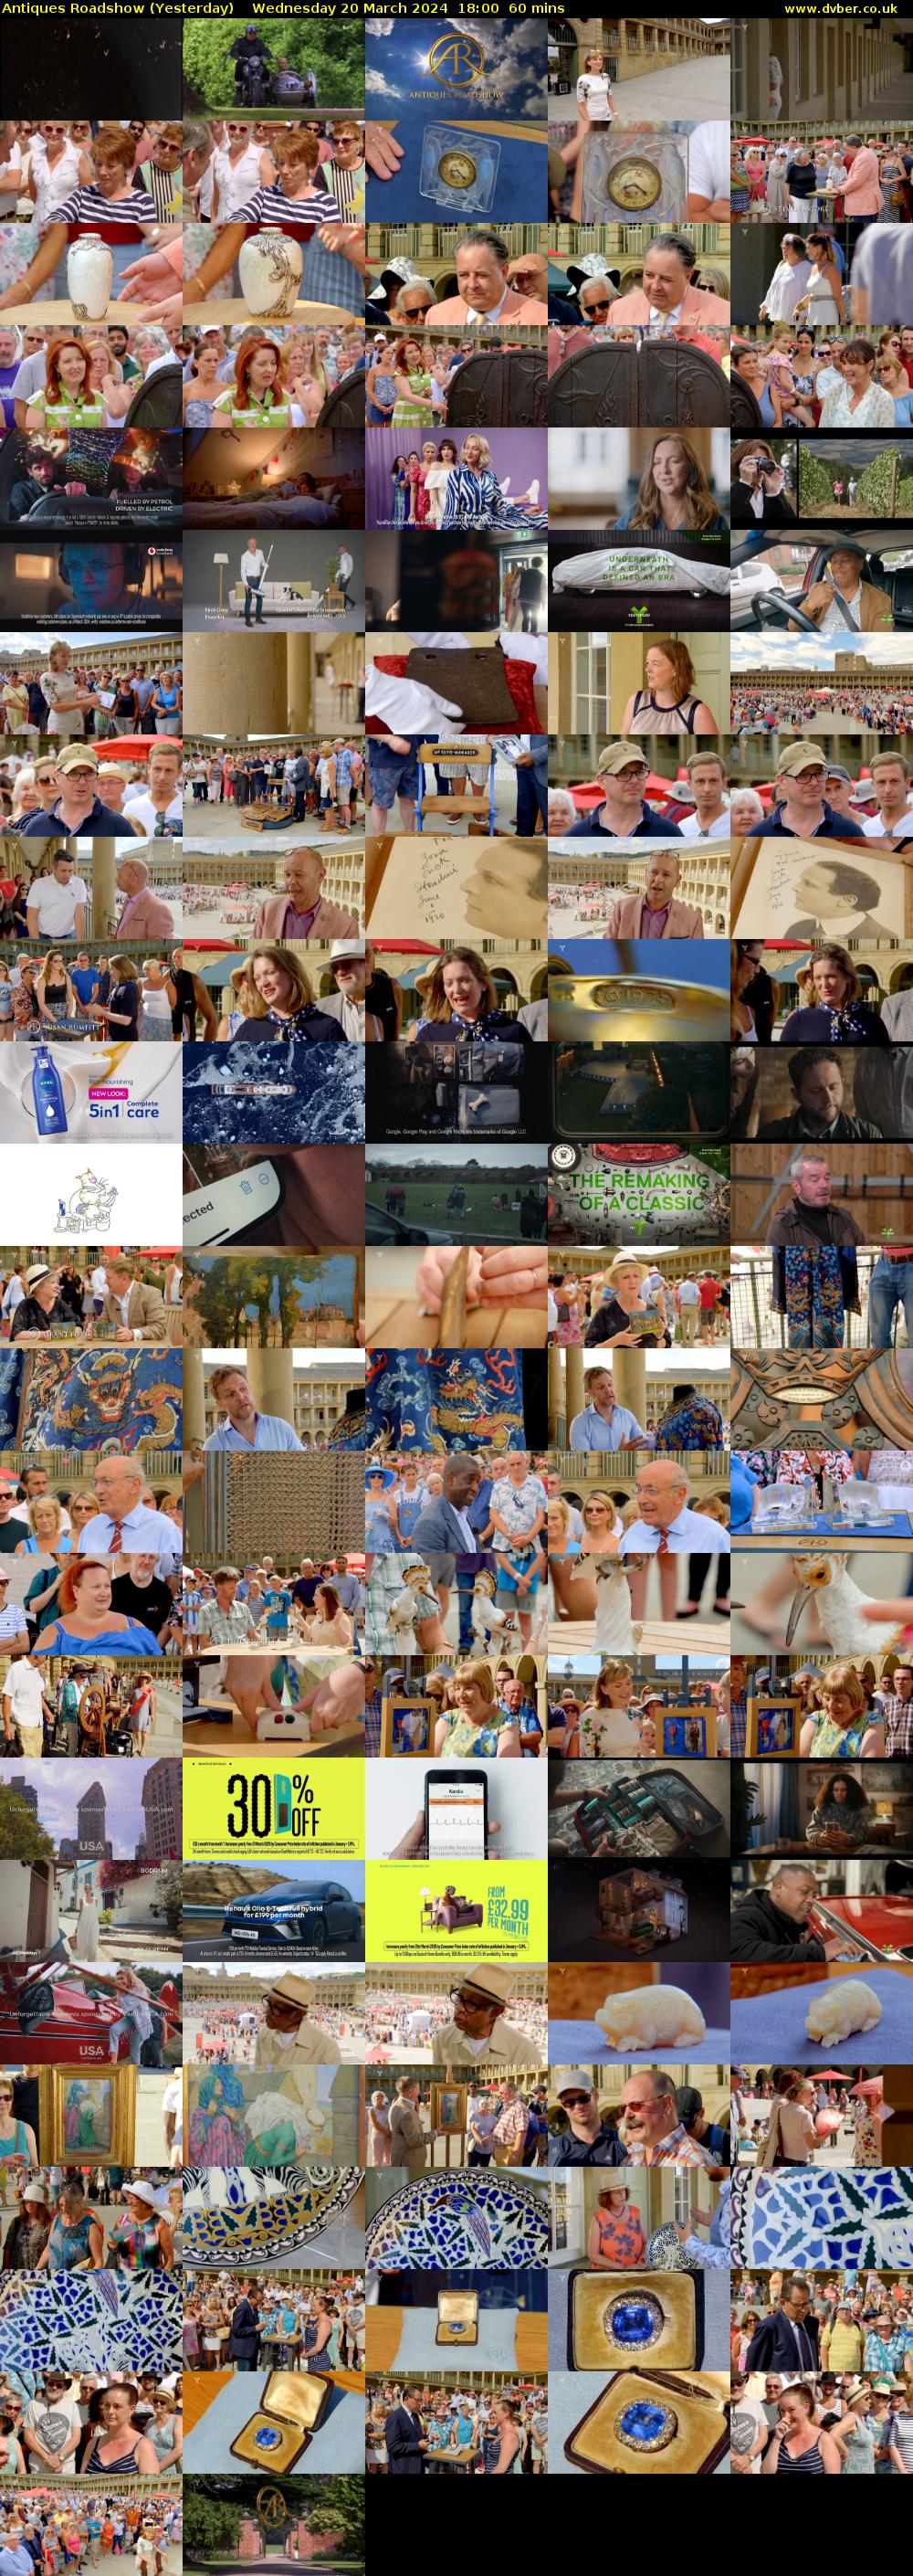 Antiques Roadshow (Yesterday) Wednesday 20 March 2024 18:00 - 19:00